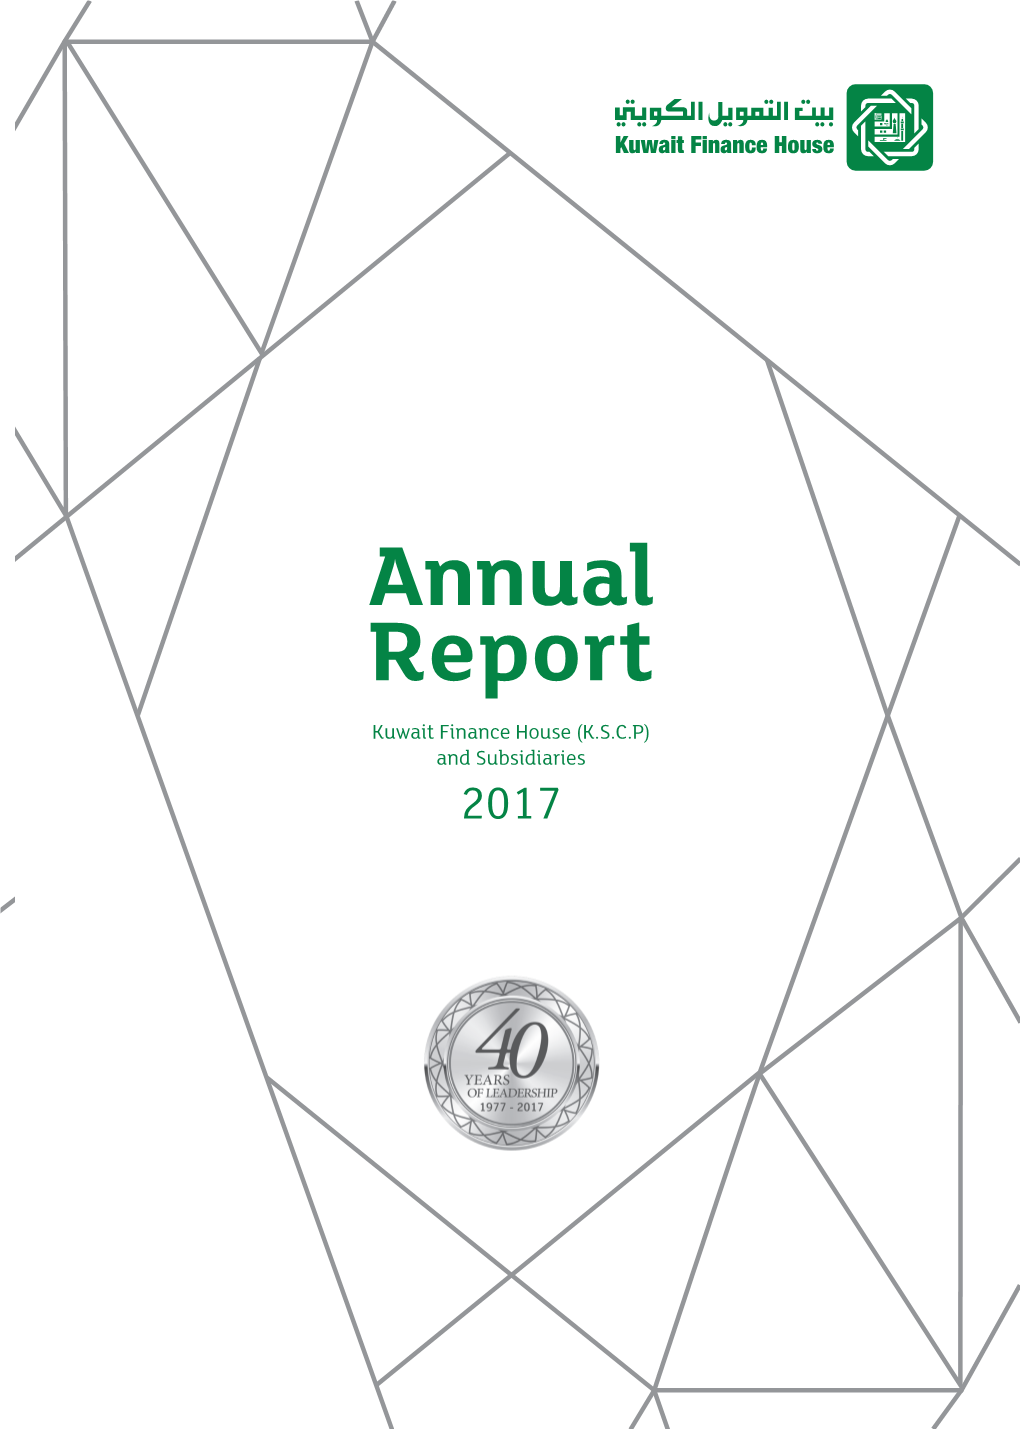 Annual Report 2017 - KFH’S Group Overview